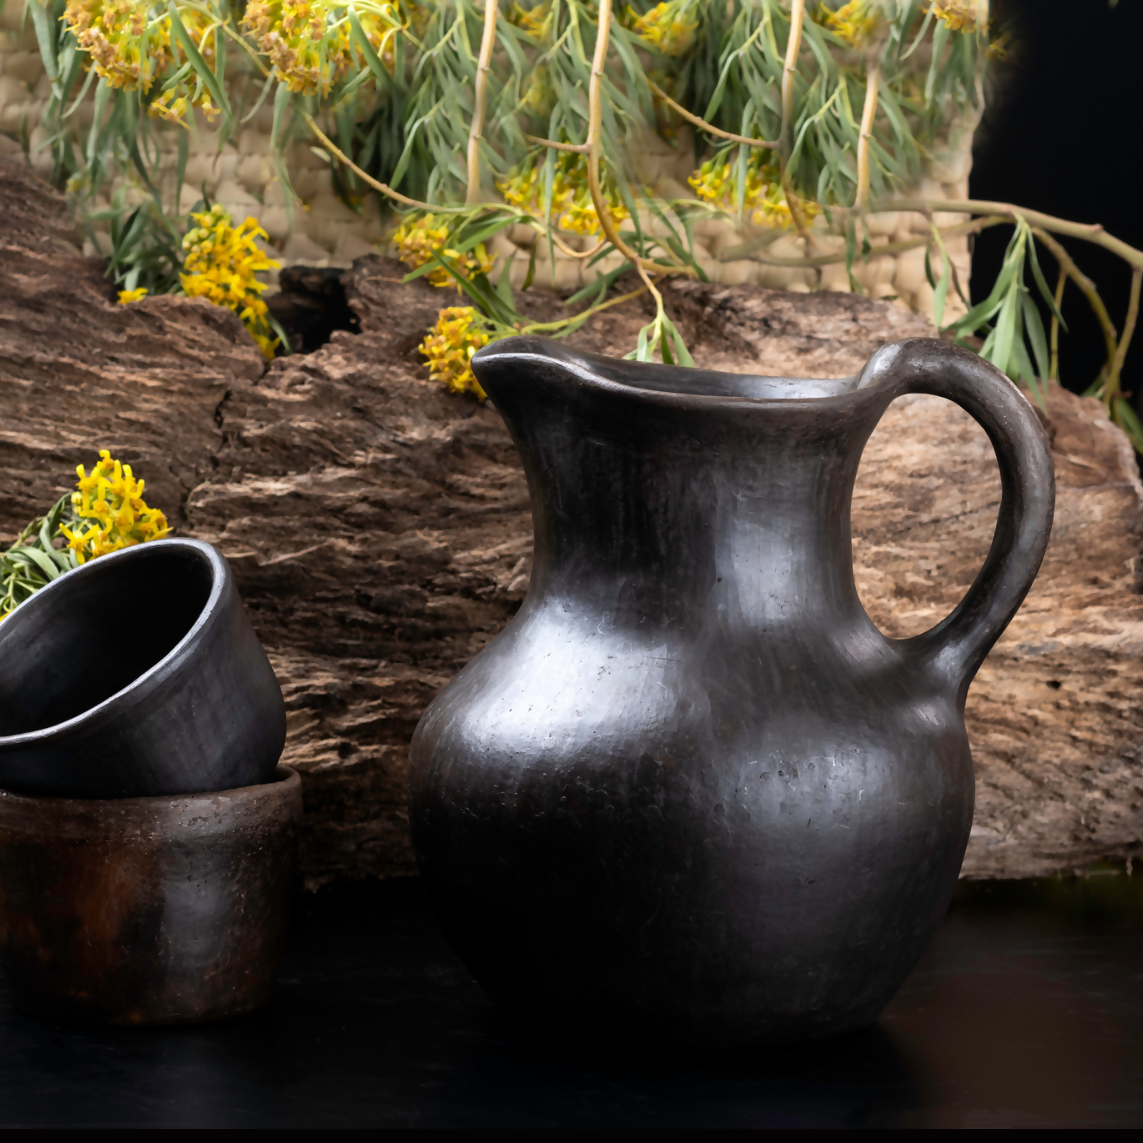 Traditional Mixe Sierra Smoked Pitcher From Las Flores, Tlahuitoltepec